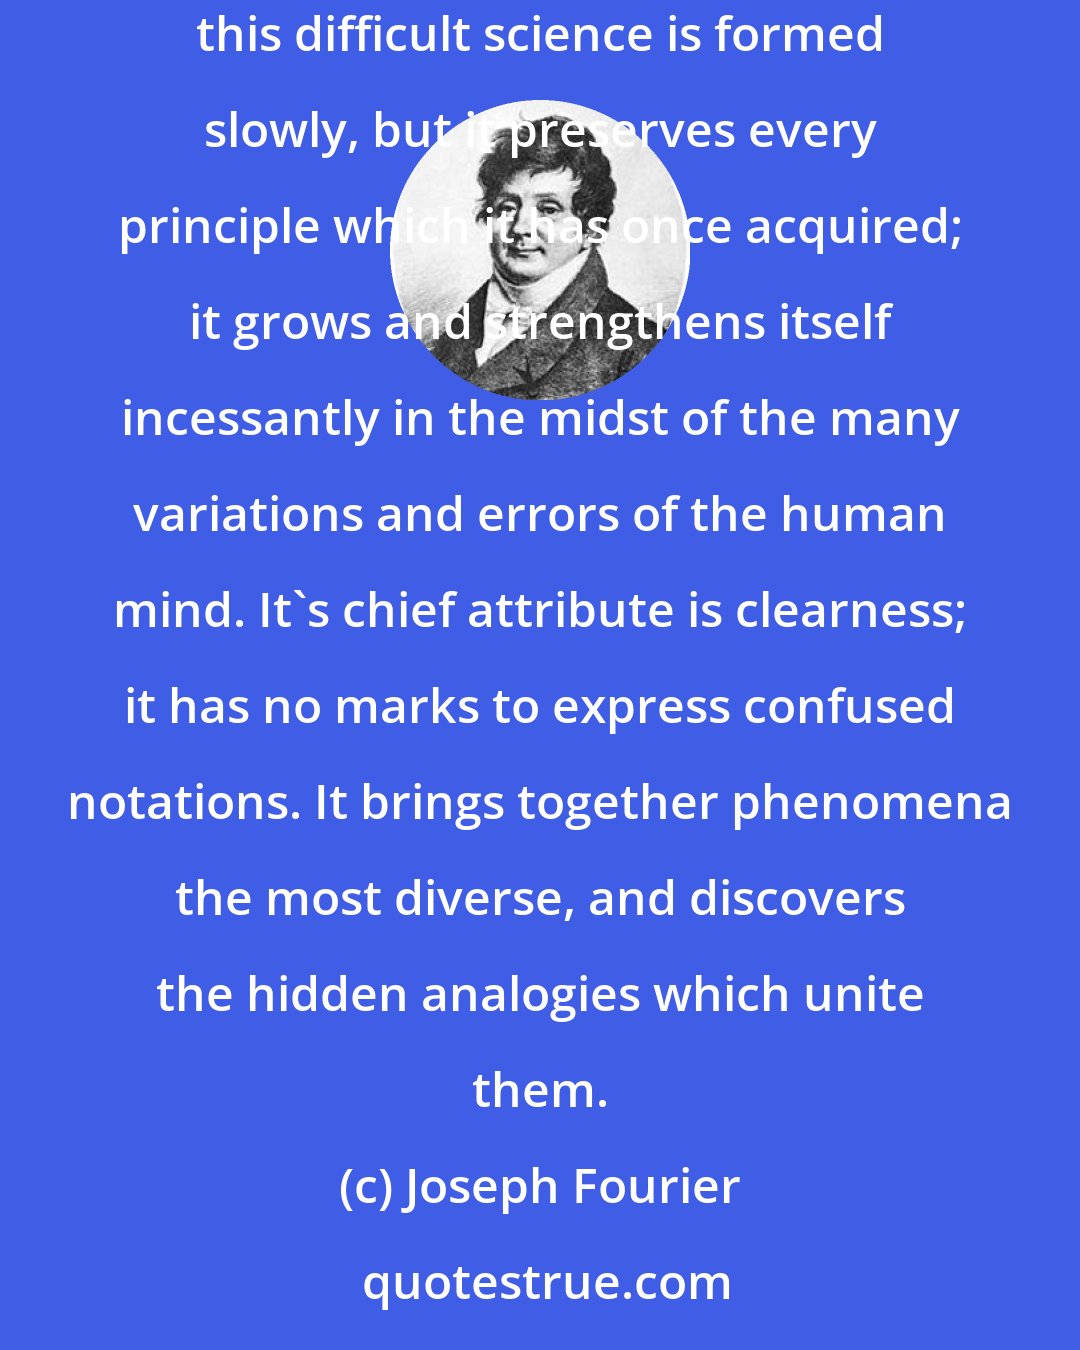 Joseph Fourier: Mathematical analysis is as extensive as nature itself; it defines all perceptible relations, measures times, spaces, forces, temperatures:;; this difficult science is formed slowly, but it preserves every principle which it has once acquired; it grows and strengthens itself incessantly in the midst of the many variations and errors of the human mind. It's chief attribute is clearness; it has no marks to express confused notations. It brings together phenomena the most diverse, and discovers the hidden analogies which unite them.